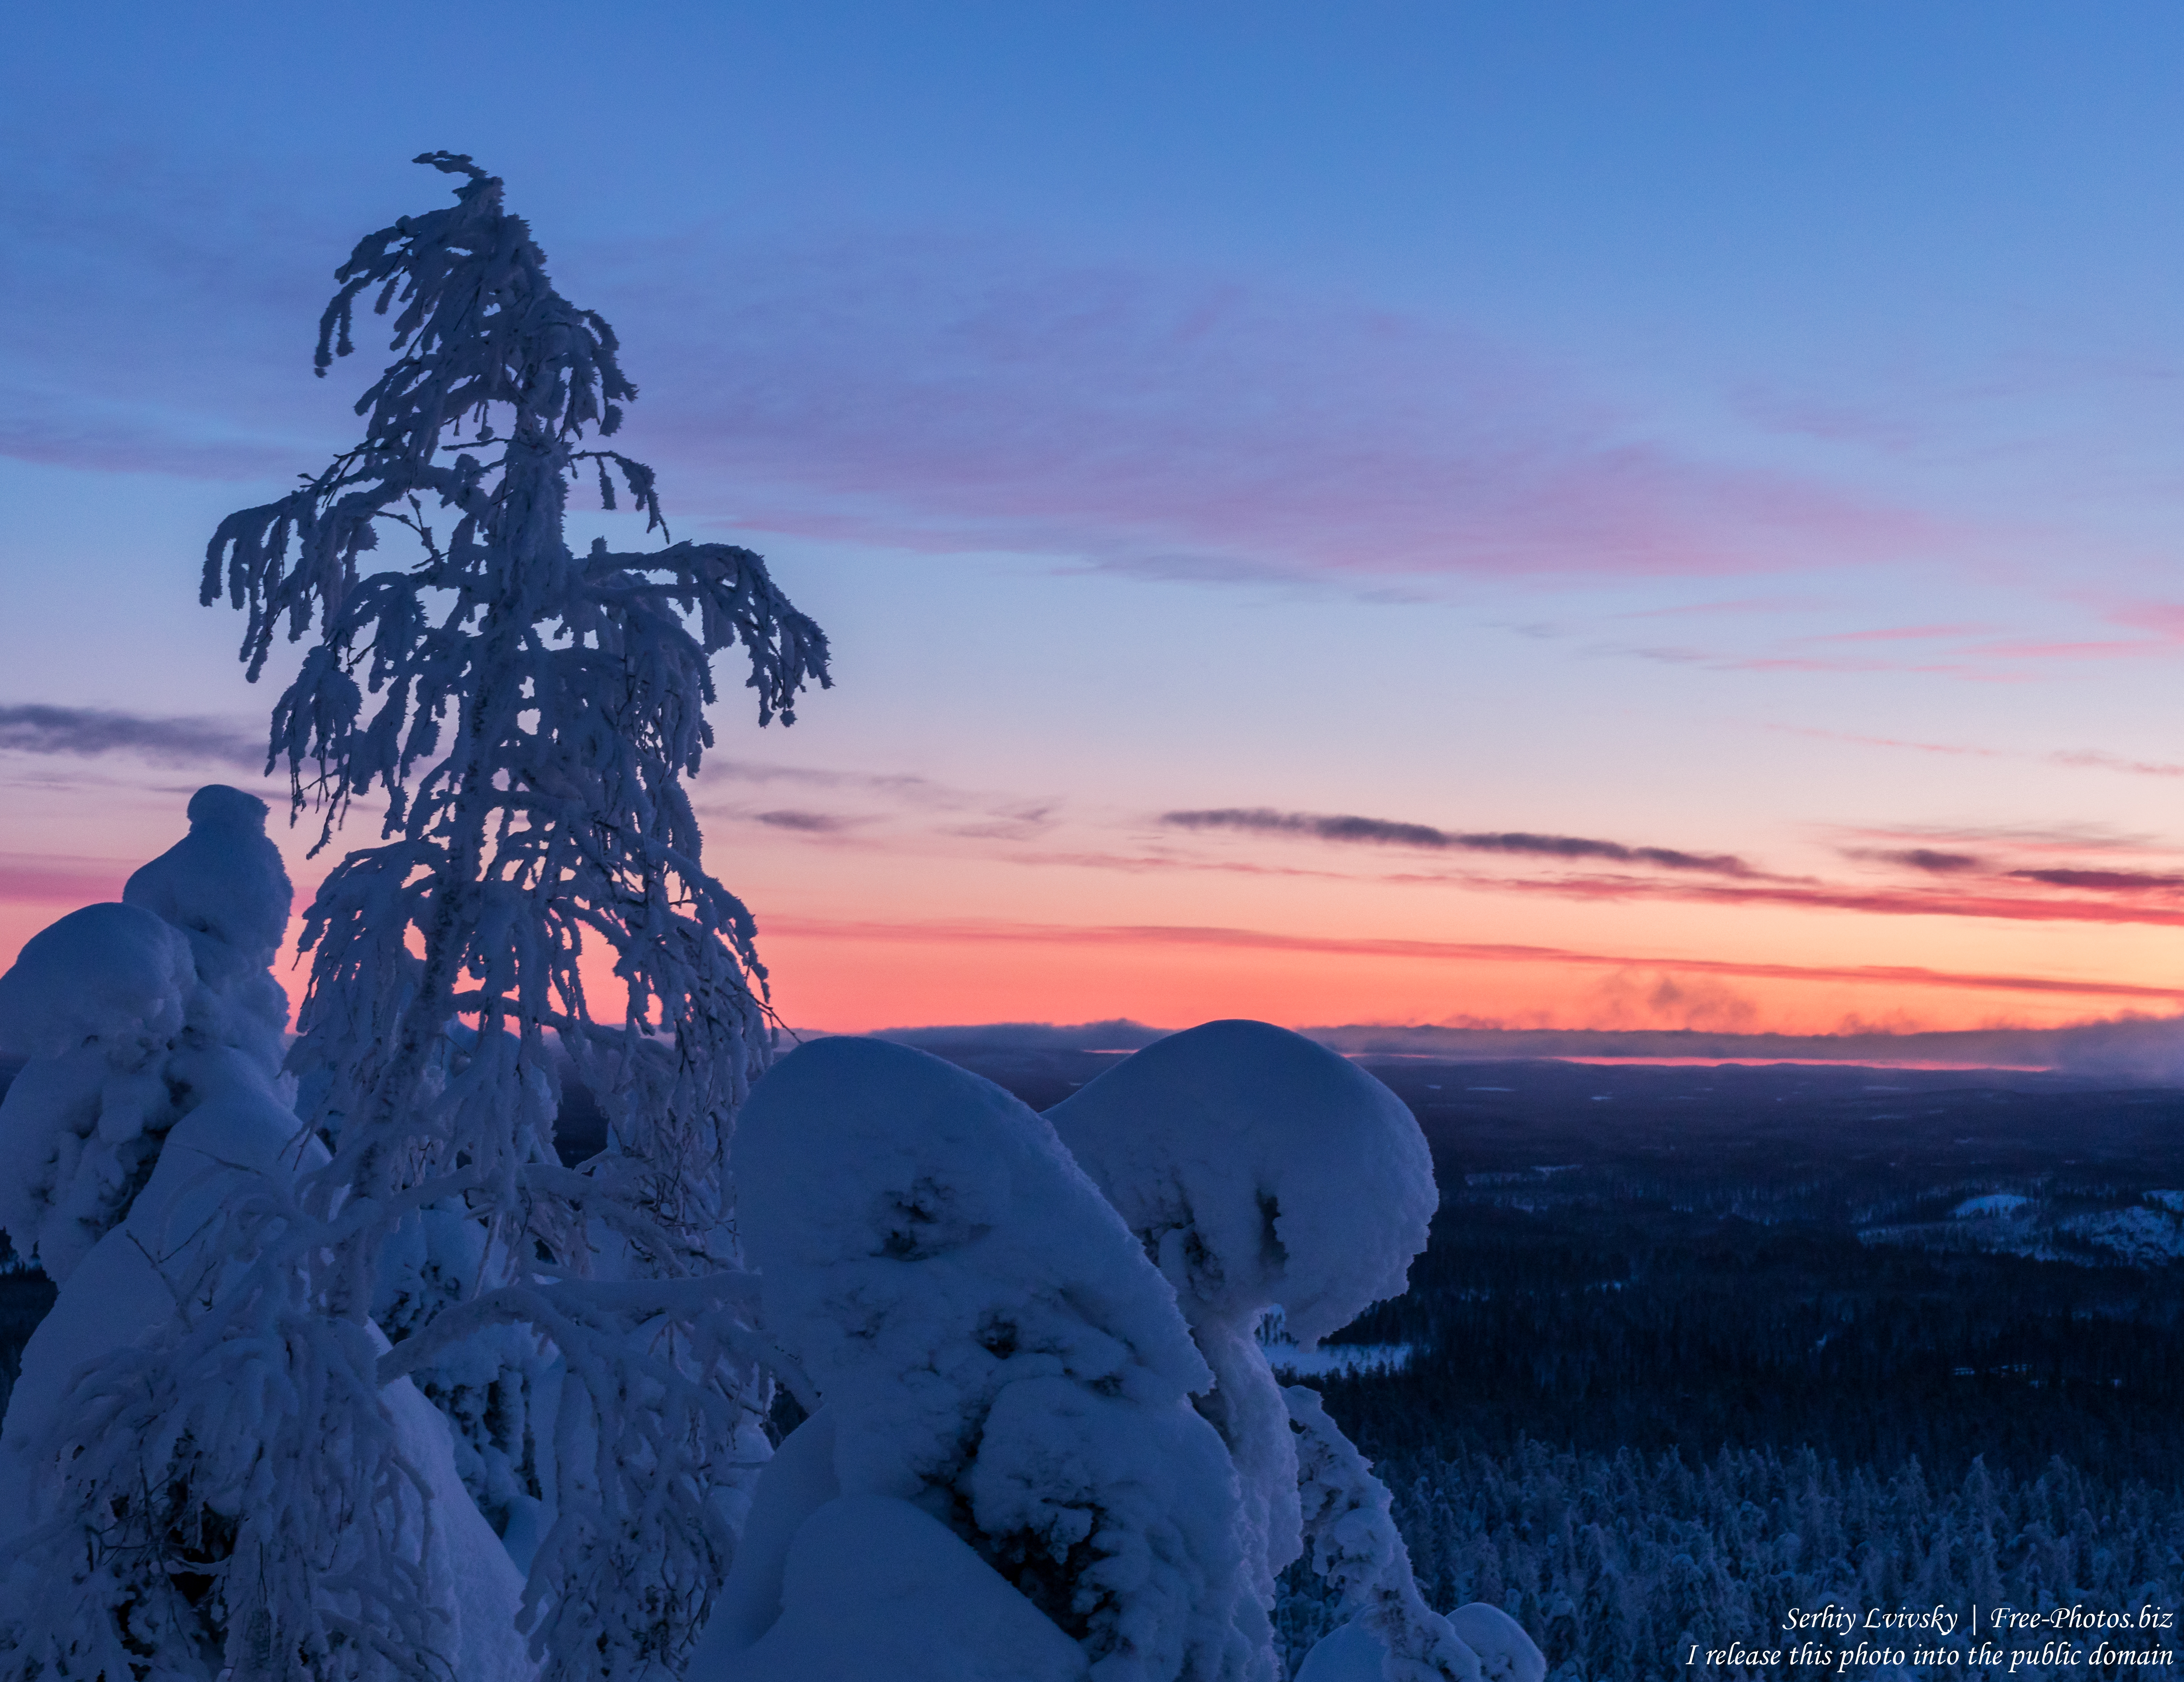 Valtavaara, Finland, photographed in January 2020 by Serhiy Lvivsky, picture 48